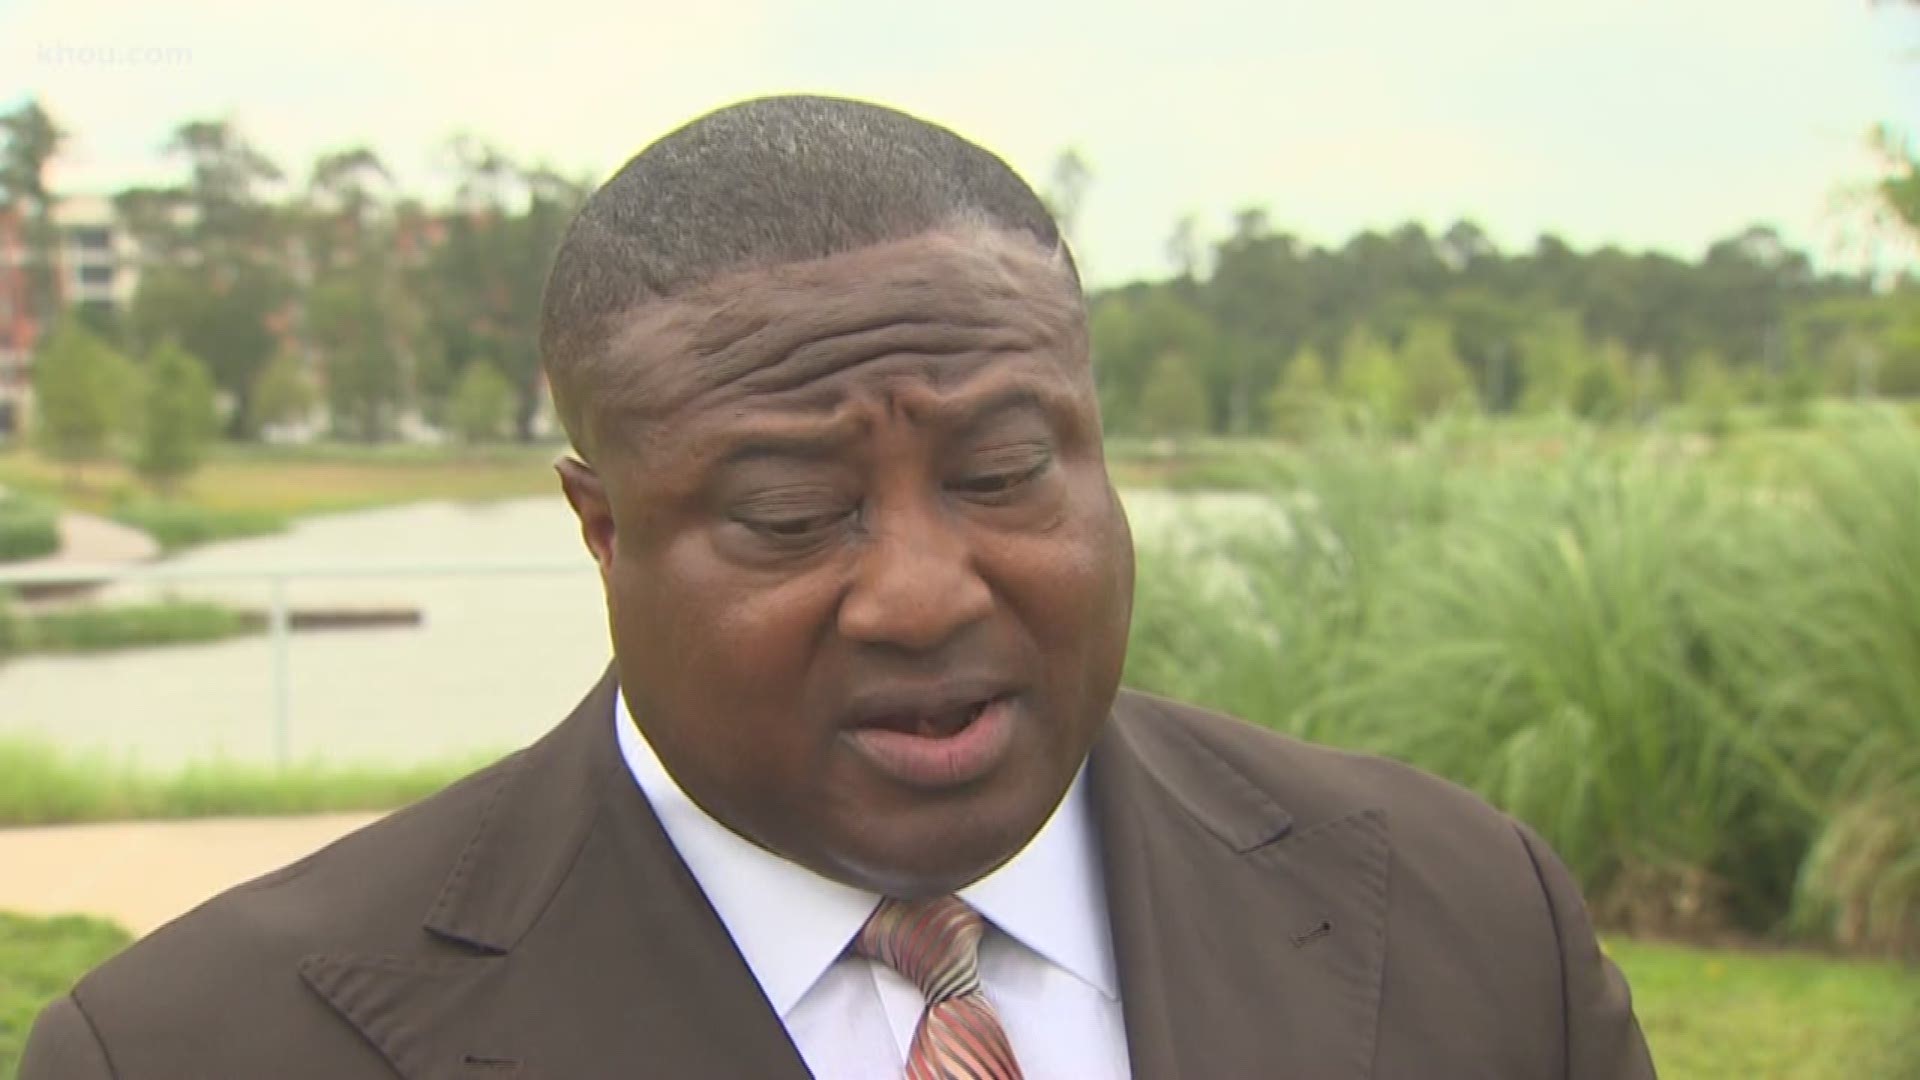 He used to be the loudest defender of Maleah Davis’ mom, Brittany Bowens. Now activist Quanell X is telling authorities he believes Bowens knows what happened to her missing daughter.